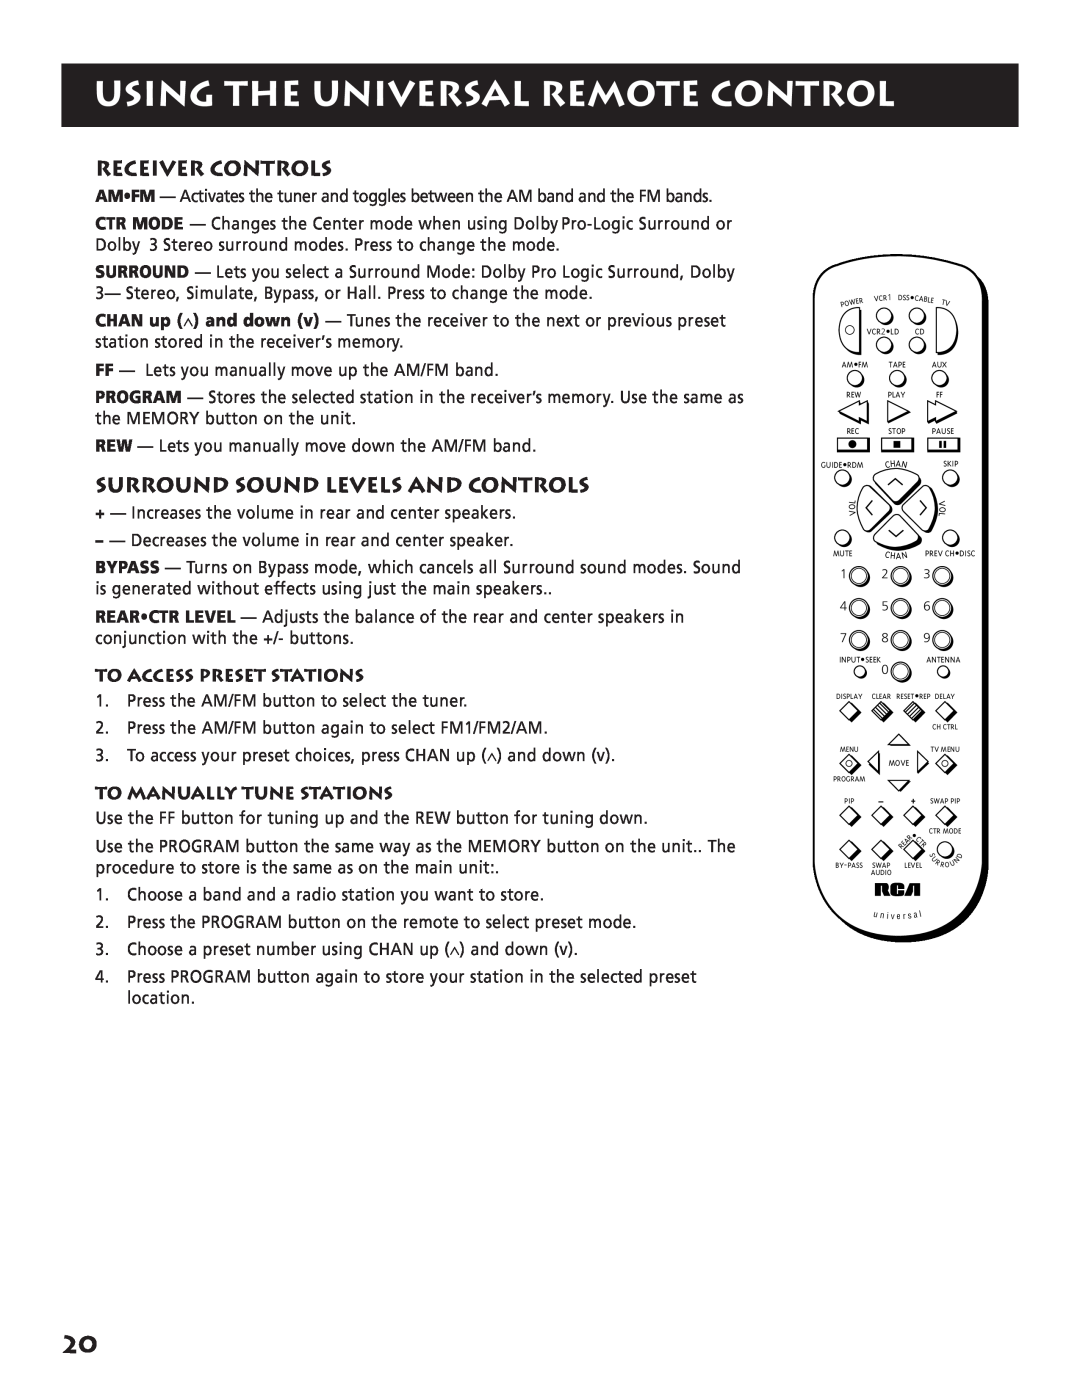 RCA RP-9380 manual Using The Universal Remote Control, Receiver Controls, Surround Sound Levels And Controls 